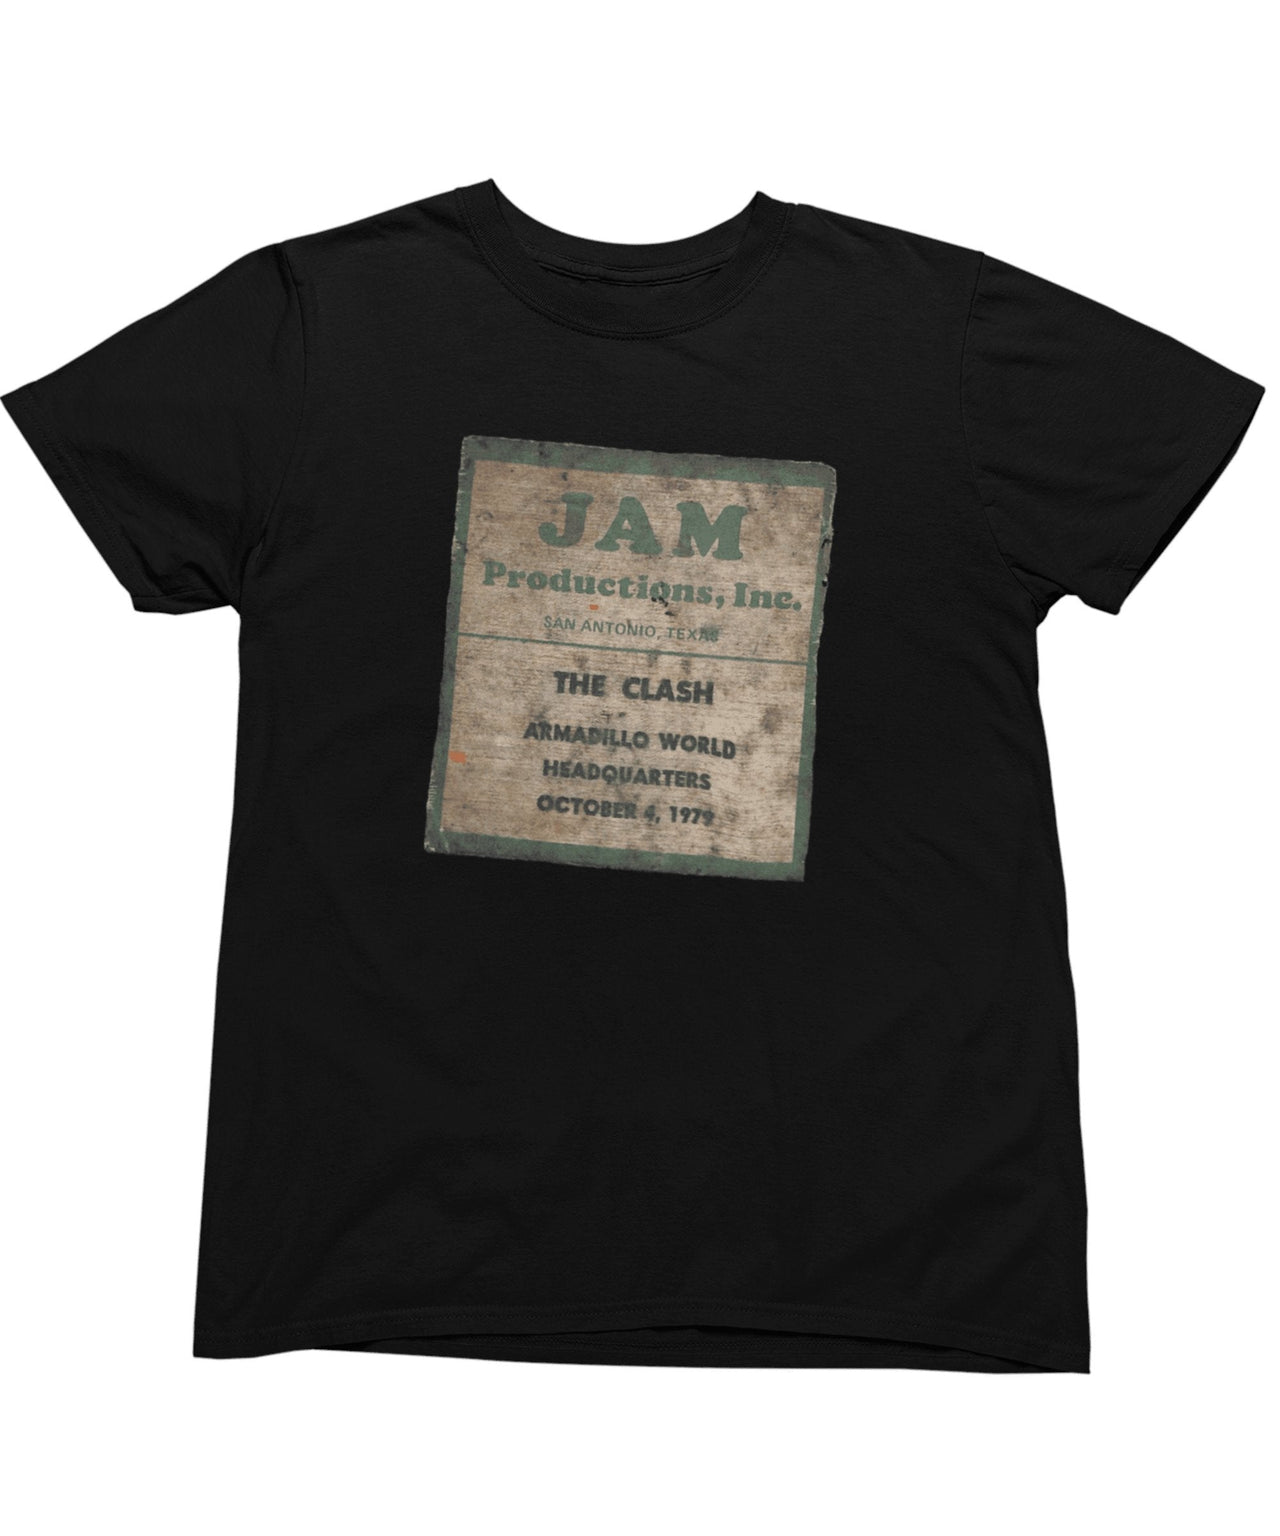 The Clash Take The Fifth Tour San Antonio Access All Areas Unisex T-Shirt For Men And Women 8Ball